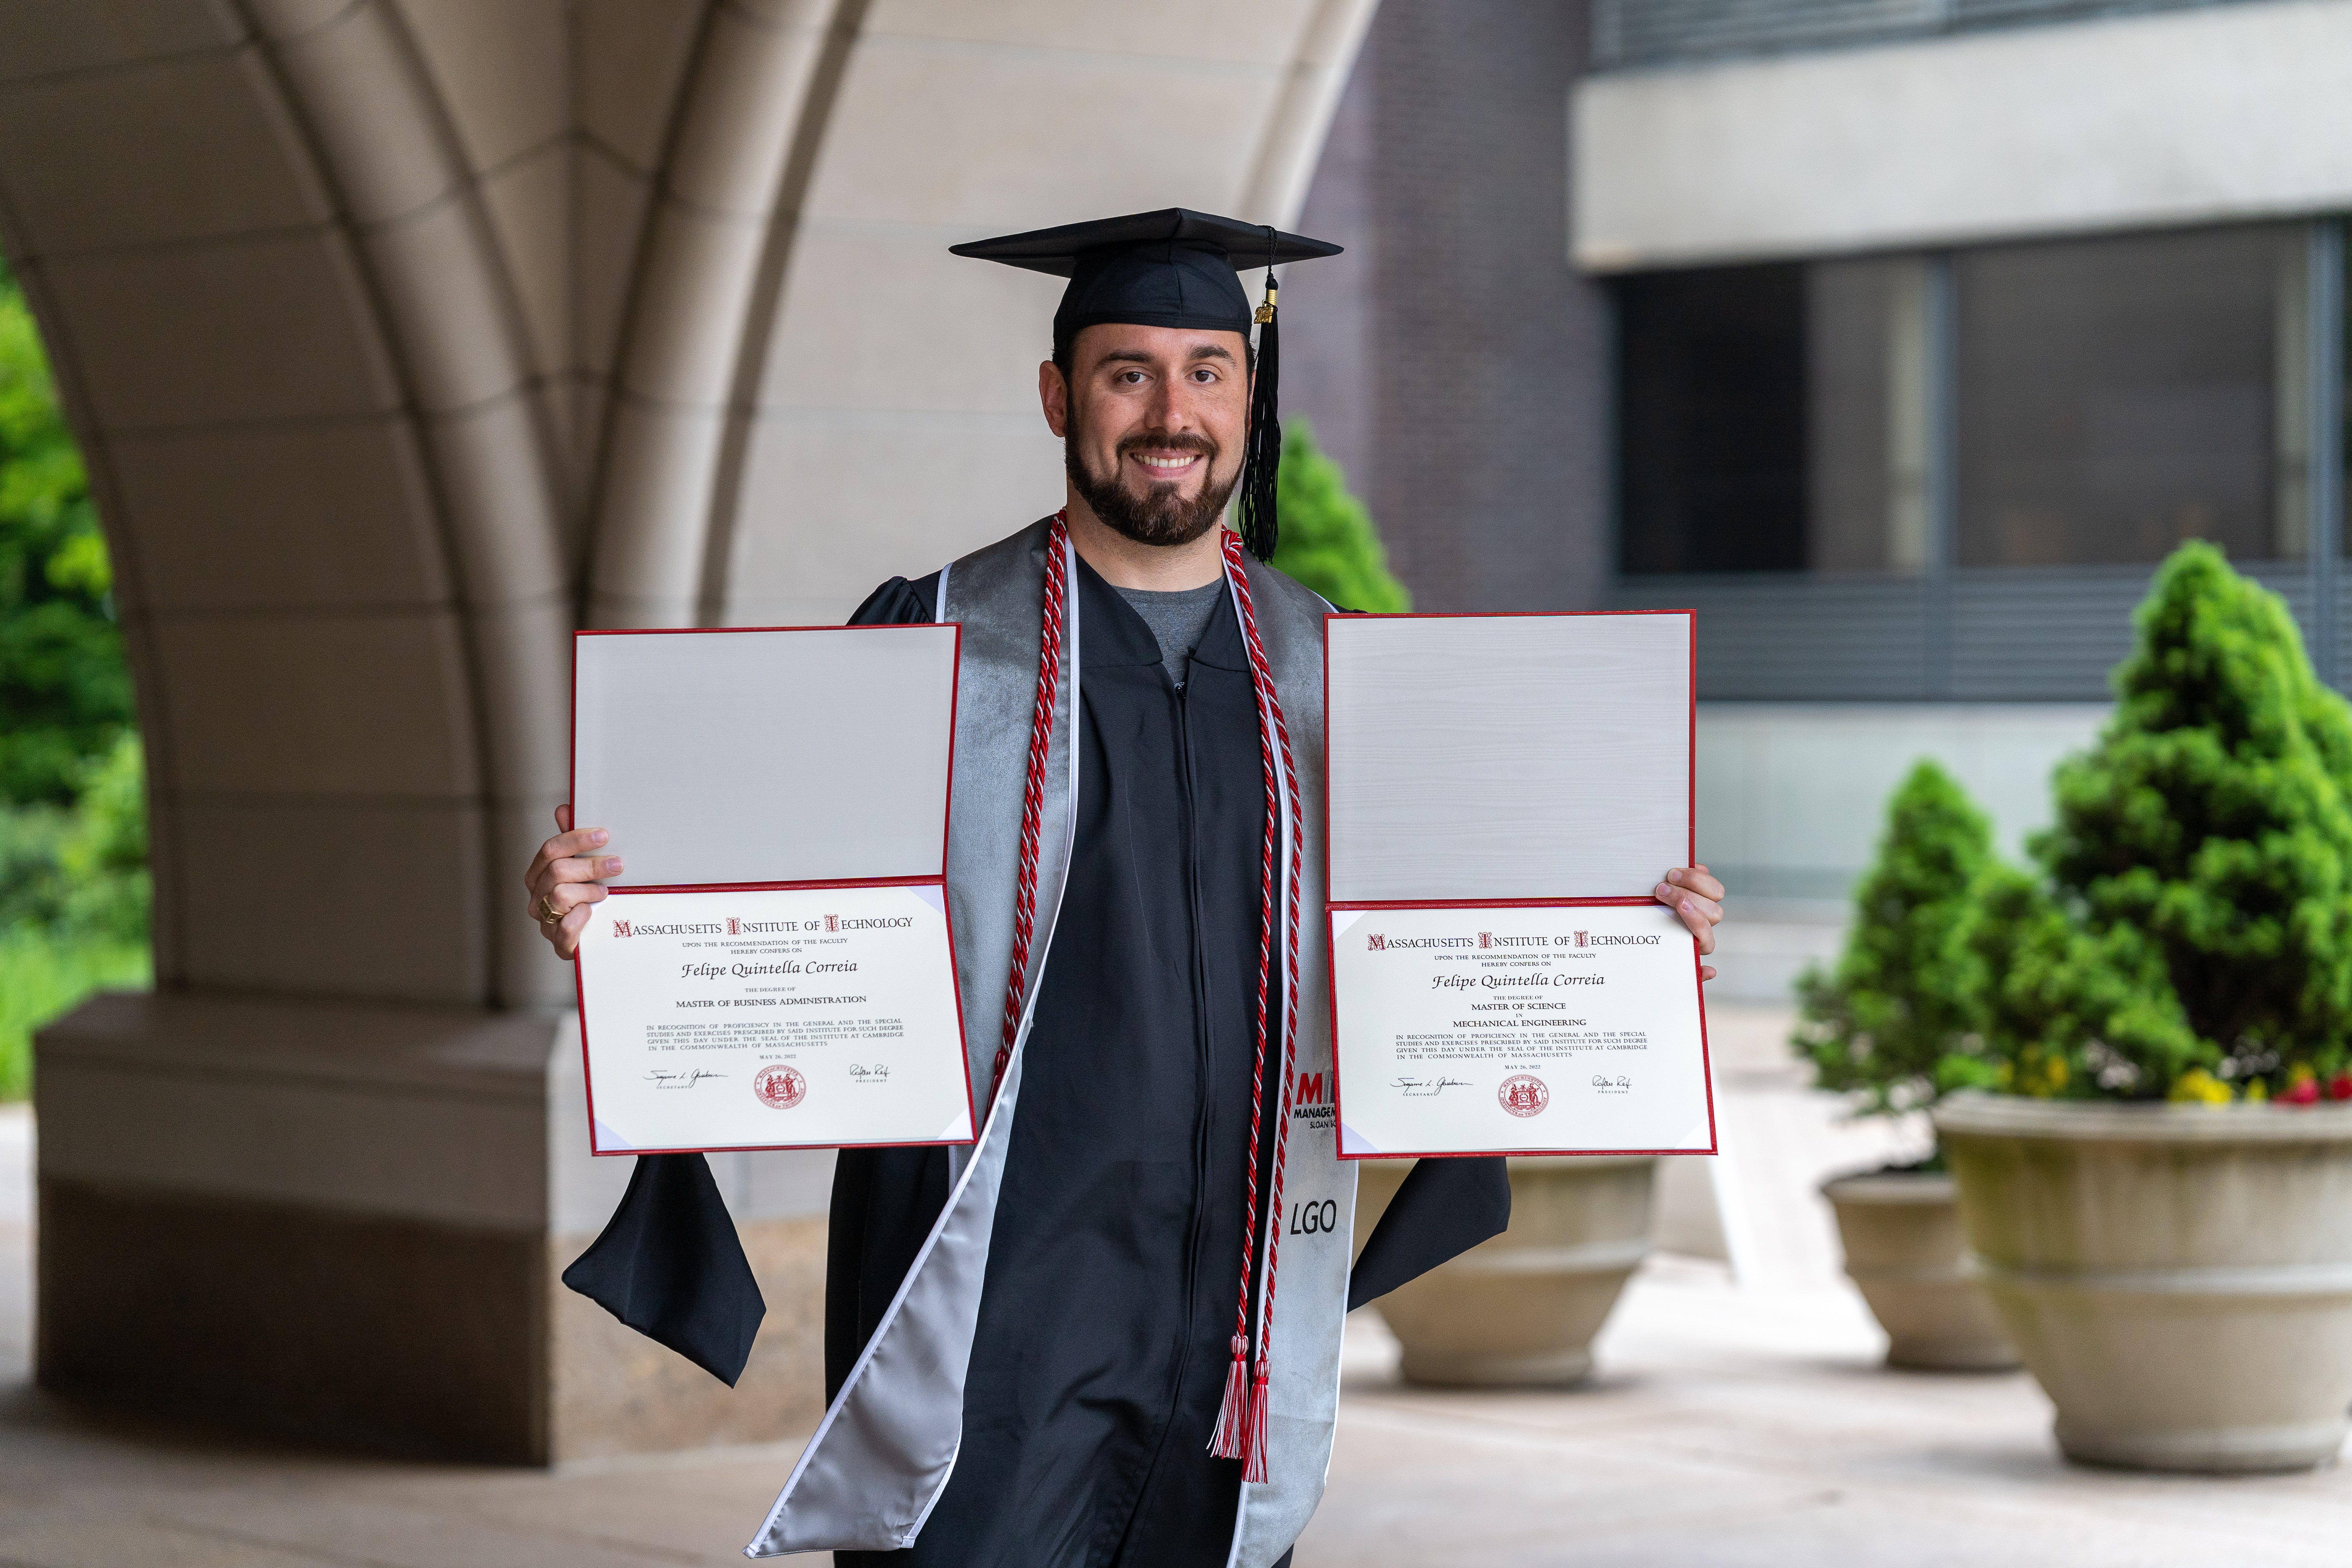 The feeling when you hold your two MIT degrees :-)